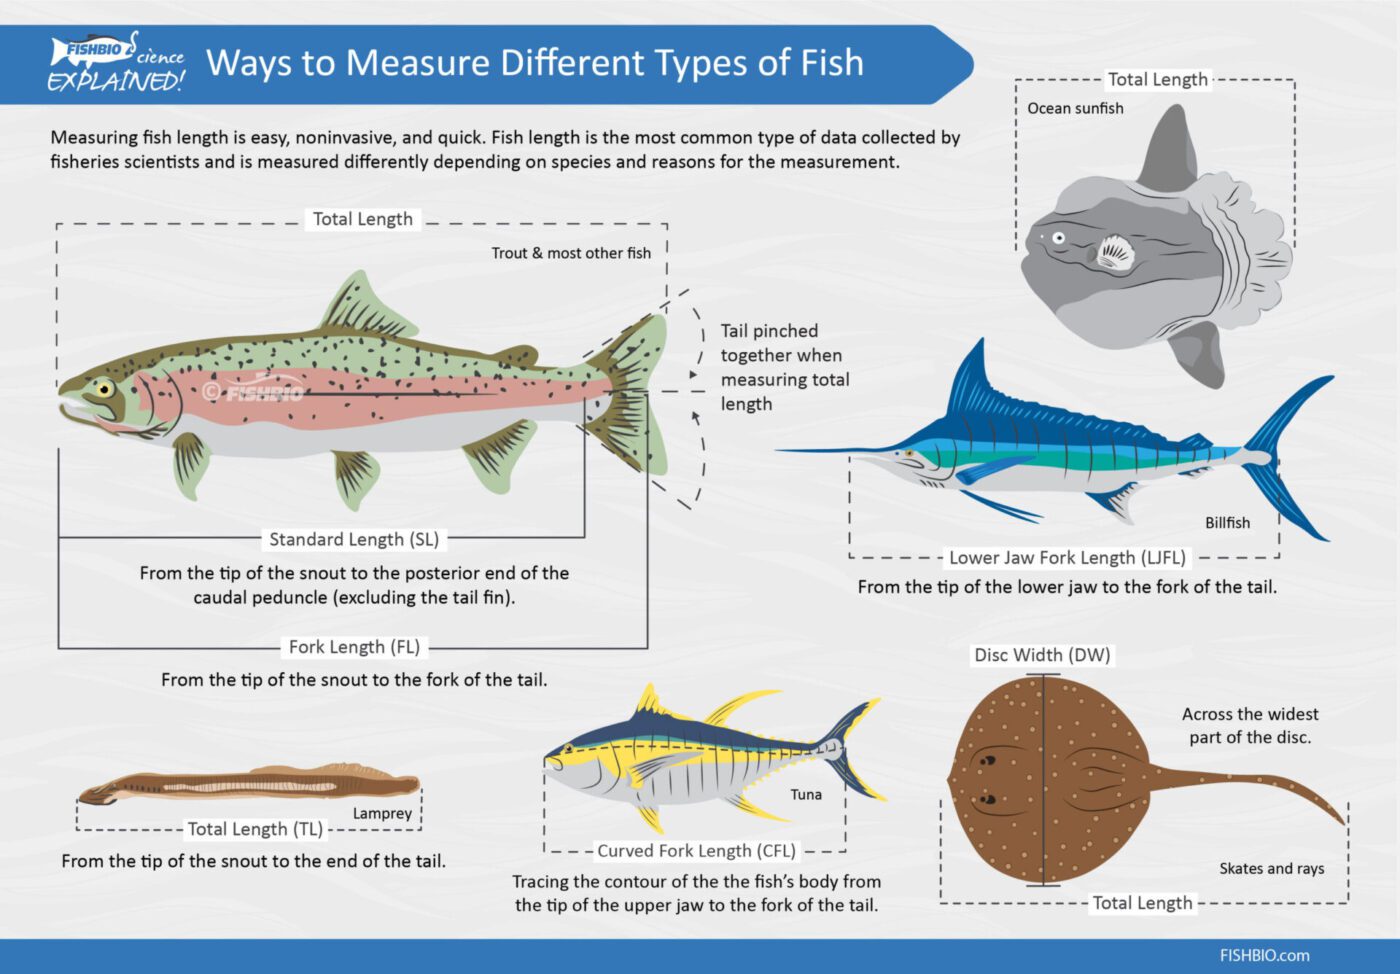 Finding the End of the Rainbow: All the Ways to Measure Fish - FISHBIO